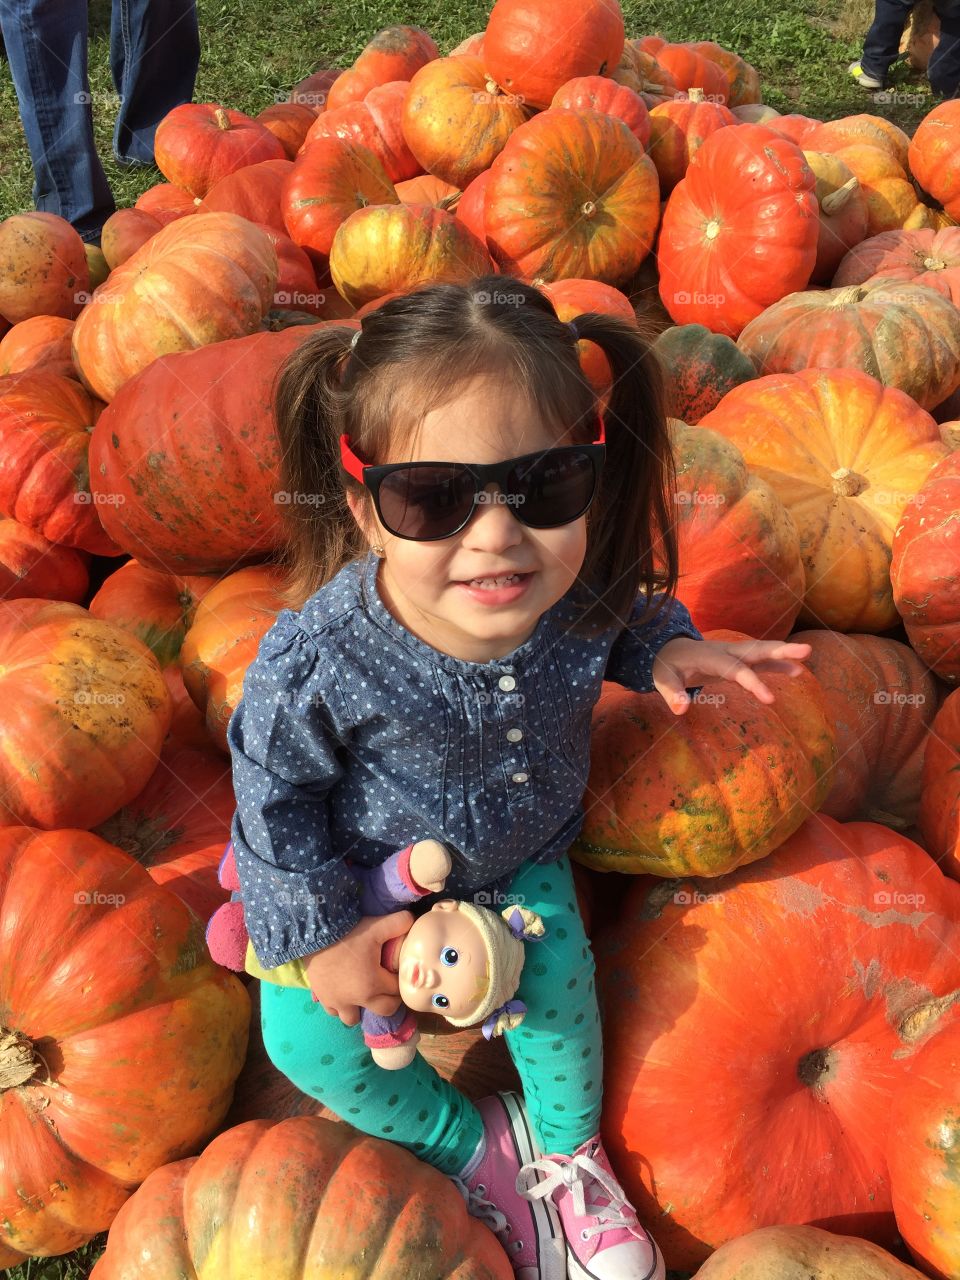 Too cool for the pumpkin patch